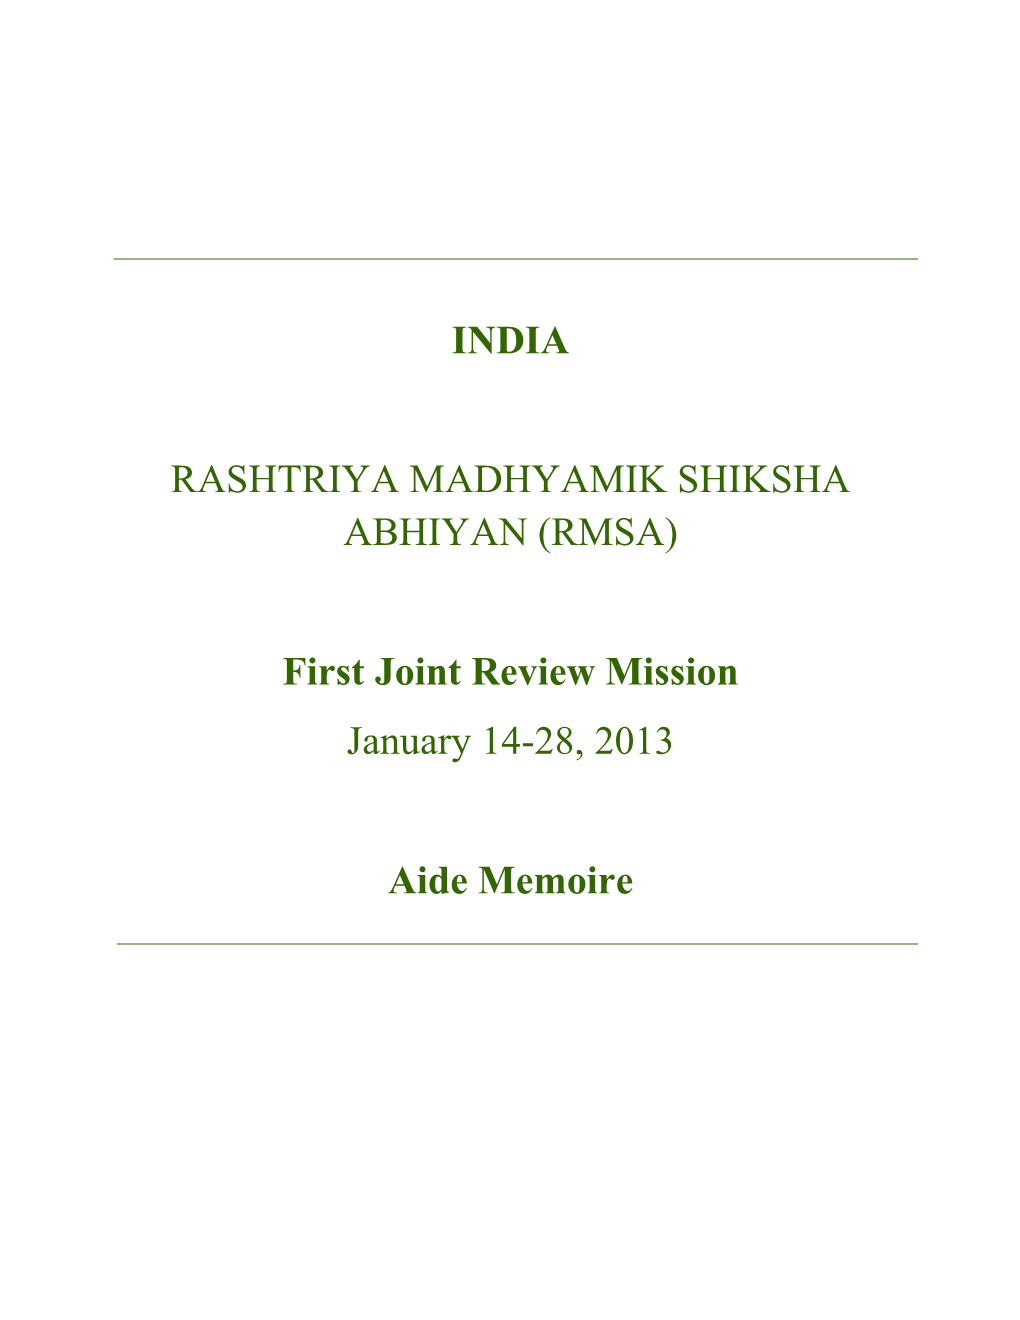 (RMSA) First Joint Review Mission January 14-28, 2013 Aide Memoire